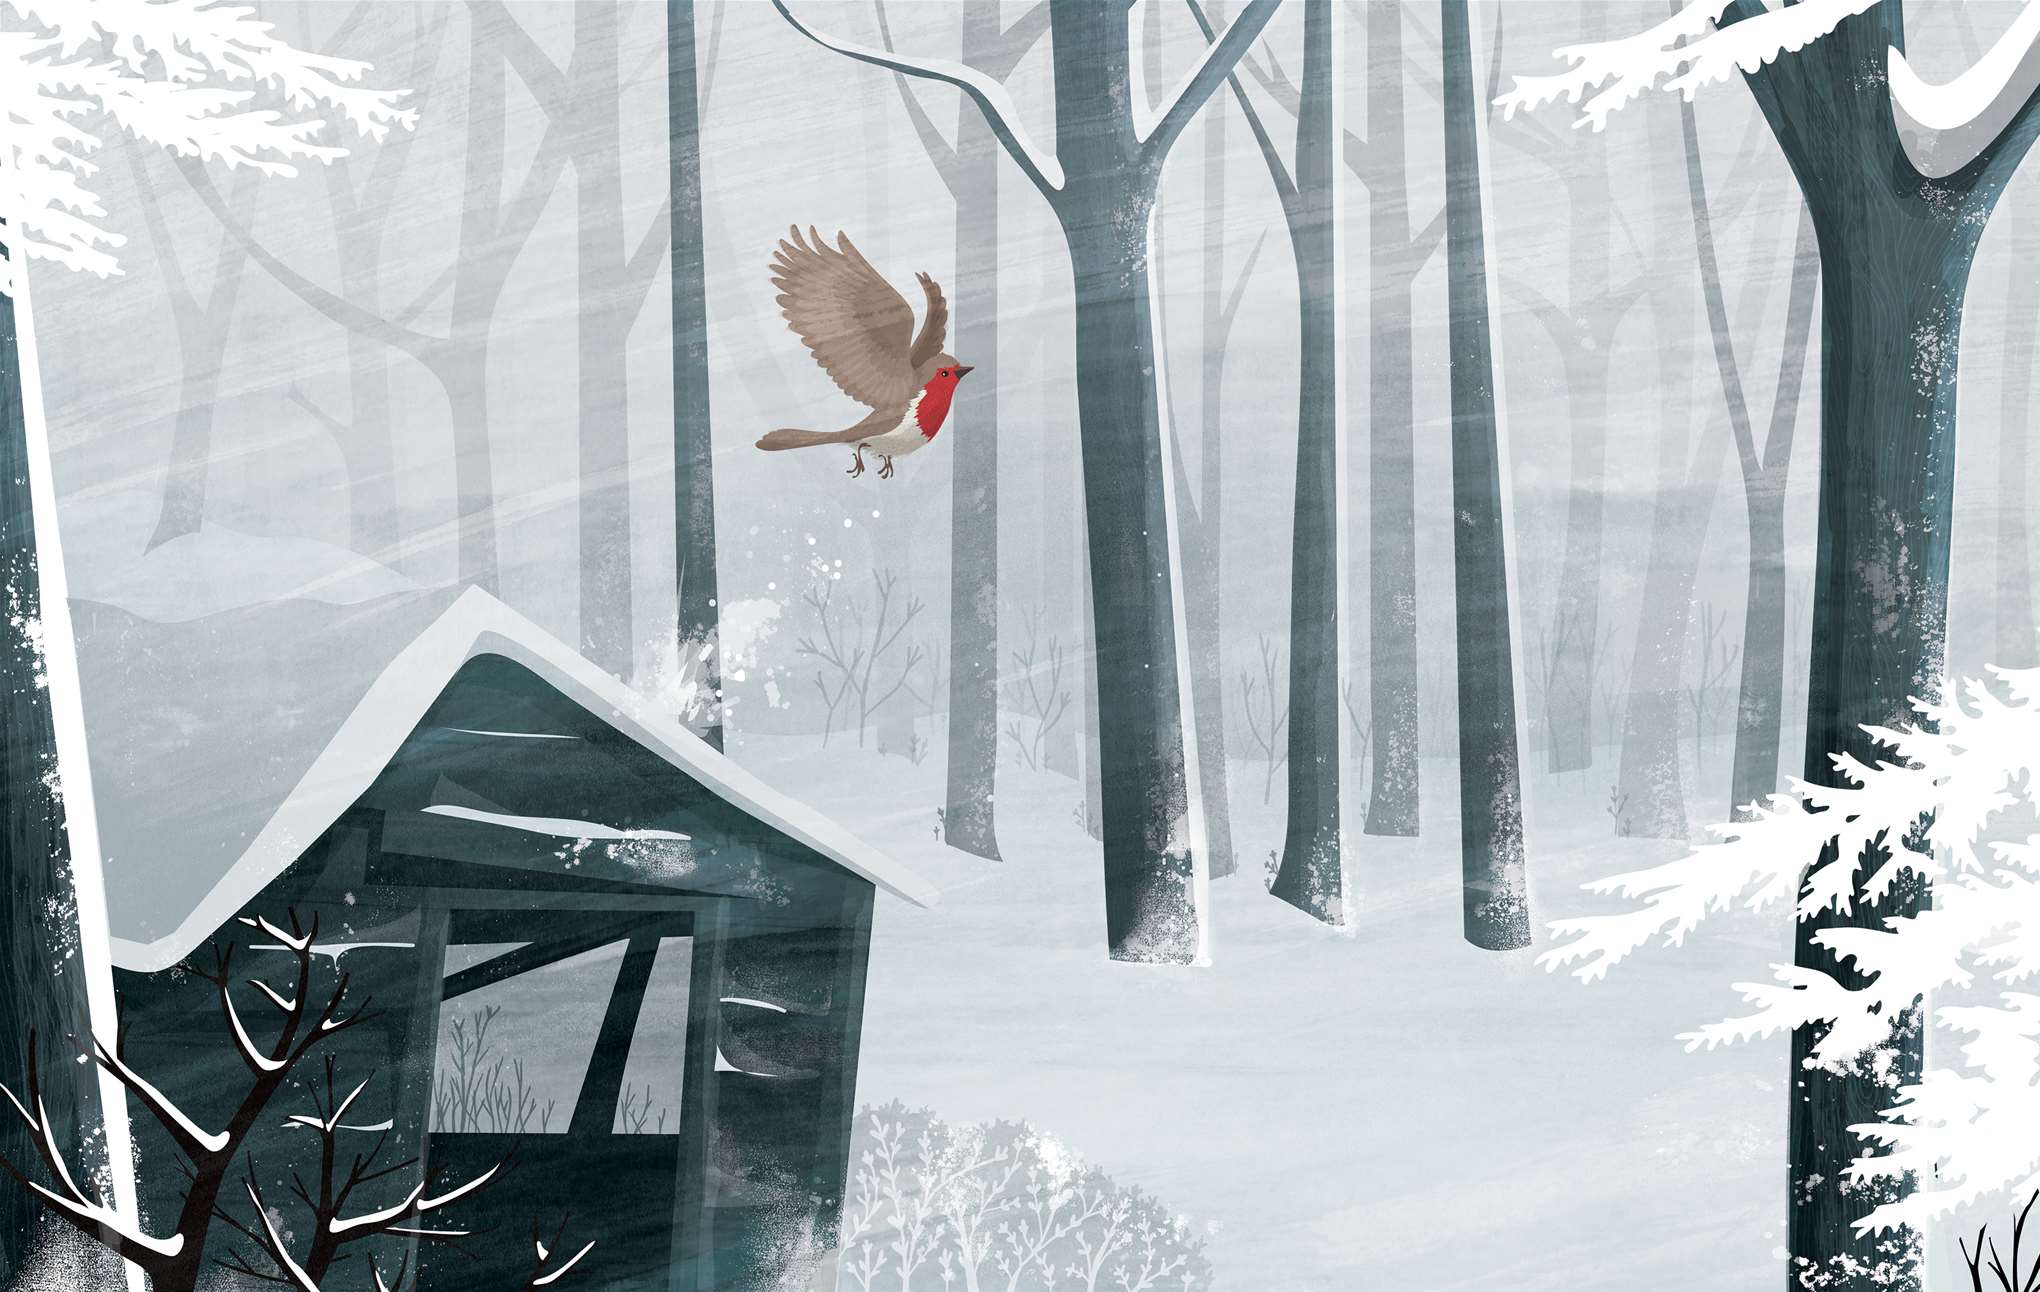 Kerry Hyndman, Winer digital textural illustration landscape of snowy house in a forest with birds flying through. 